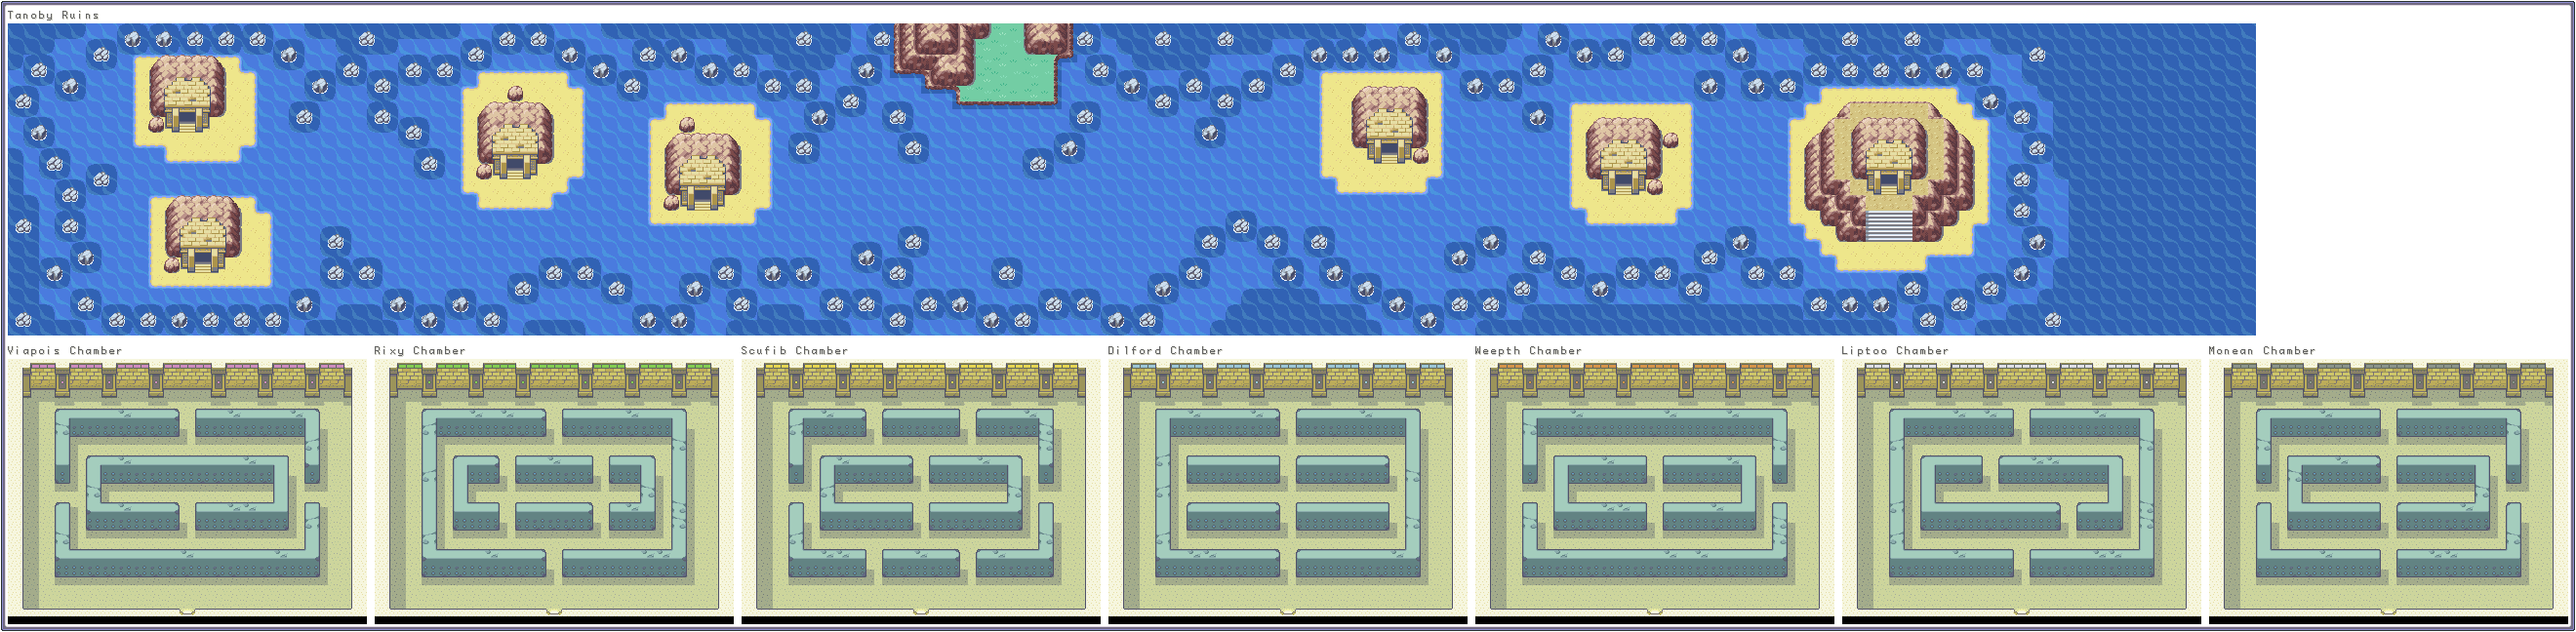 Pokémon FireRed / LeafGreen - Tanoby Ruins